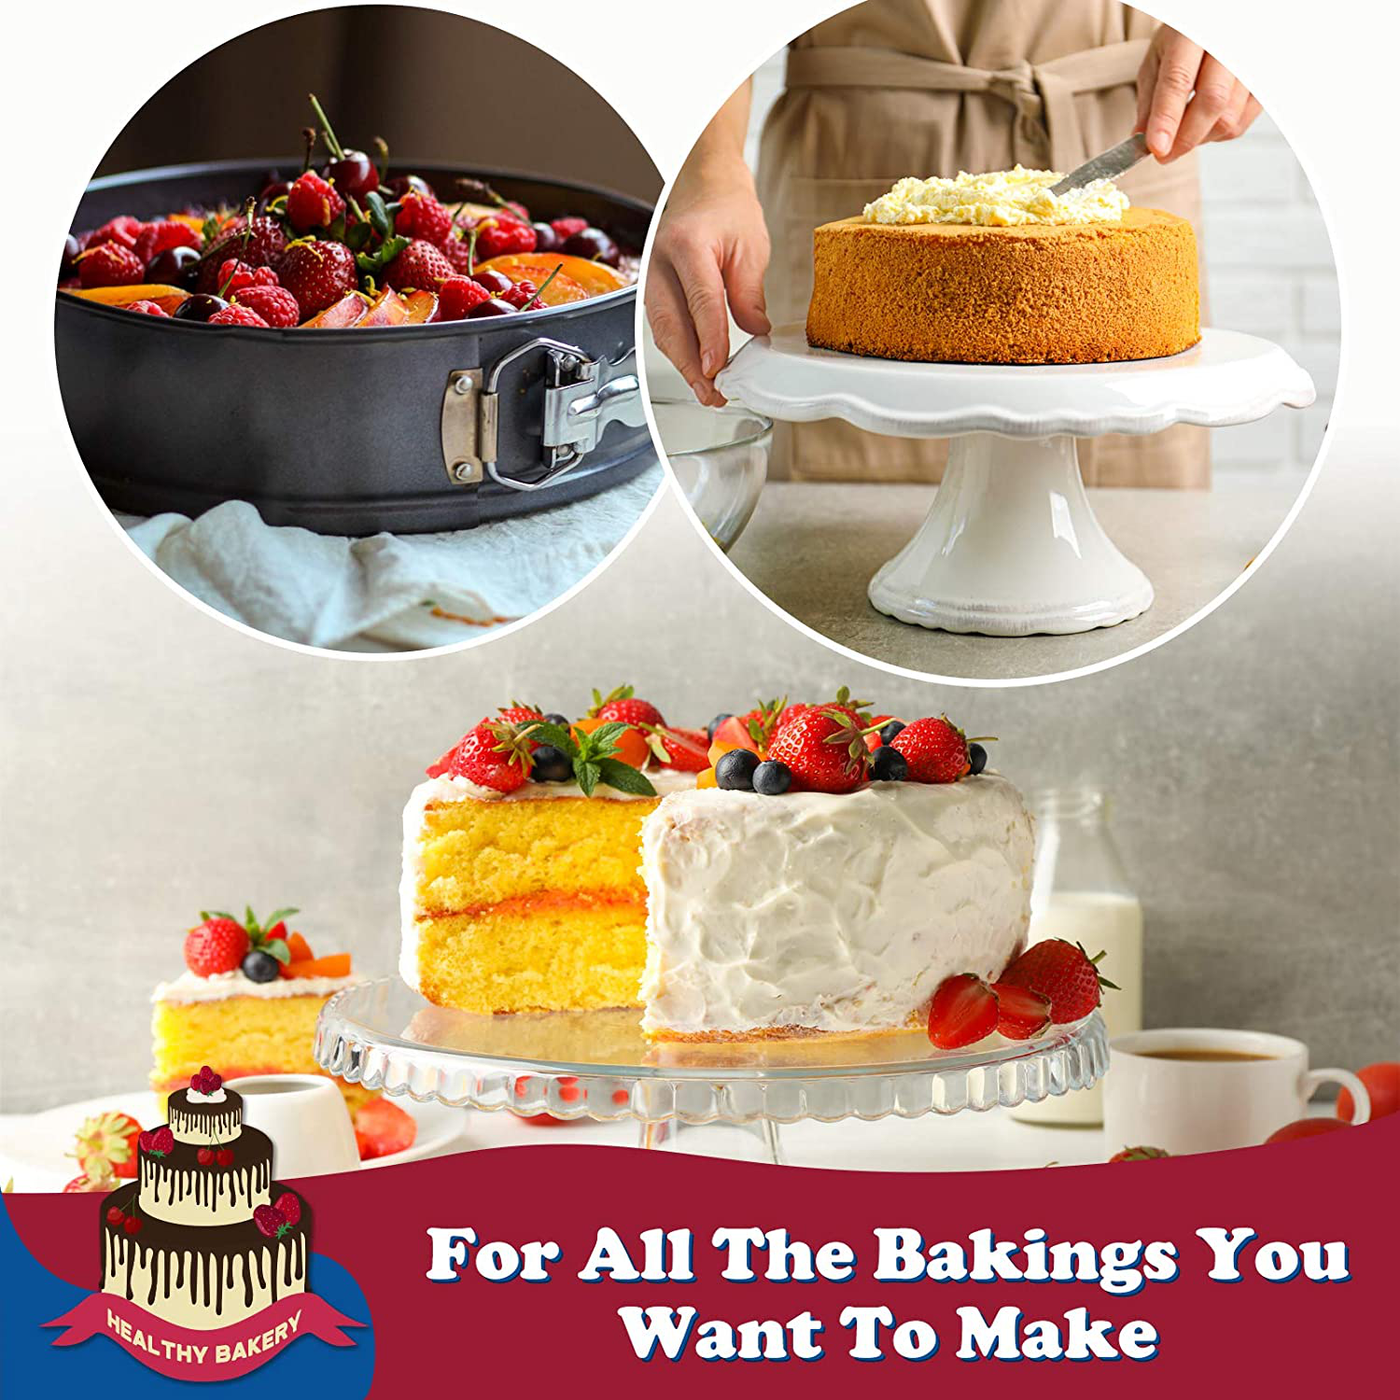 Hiware 8 Inch Non-stick Springform Pan with Removable Bottom - Leakproof Cheesecake Pan with 50 Pcs Parchment Paper